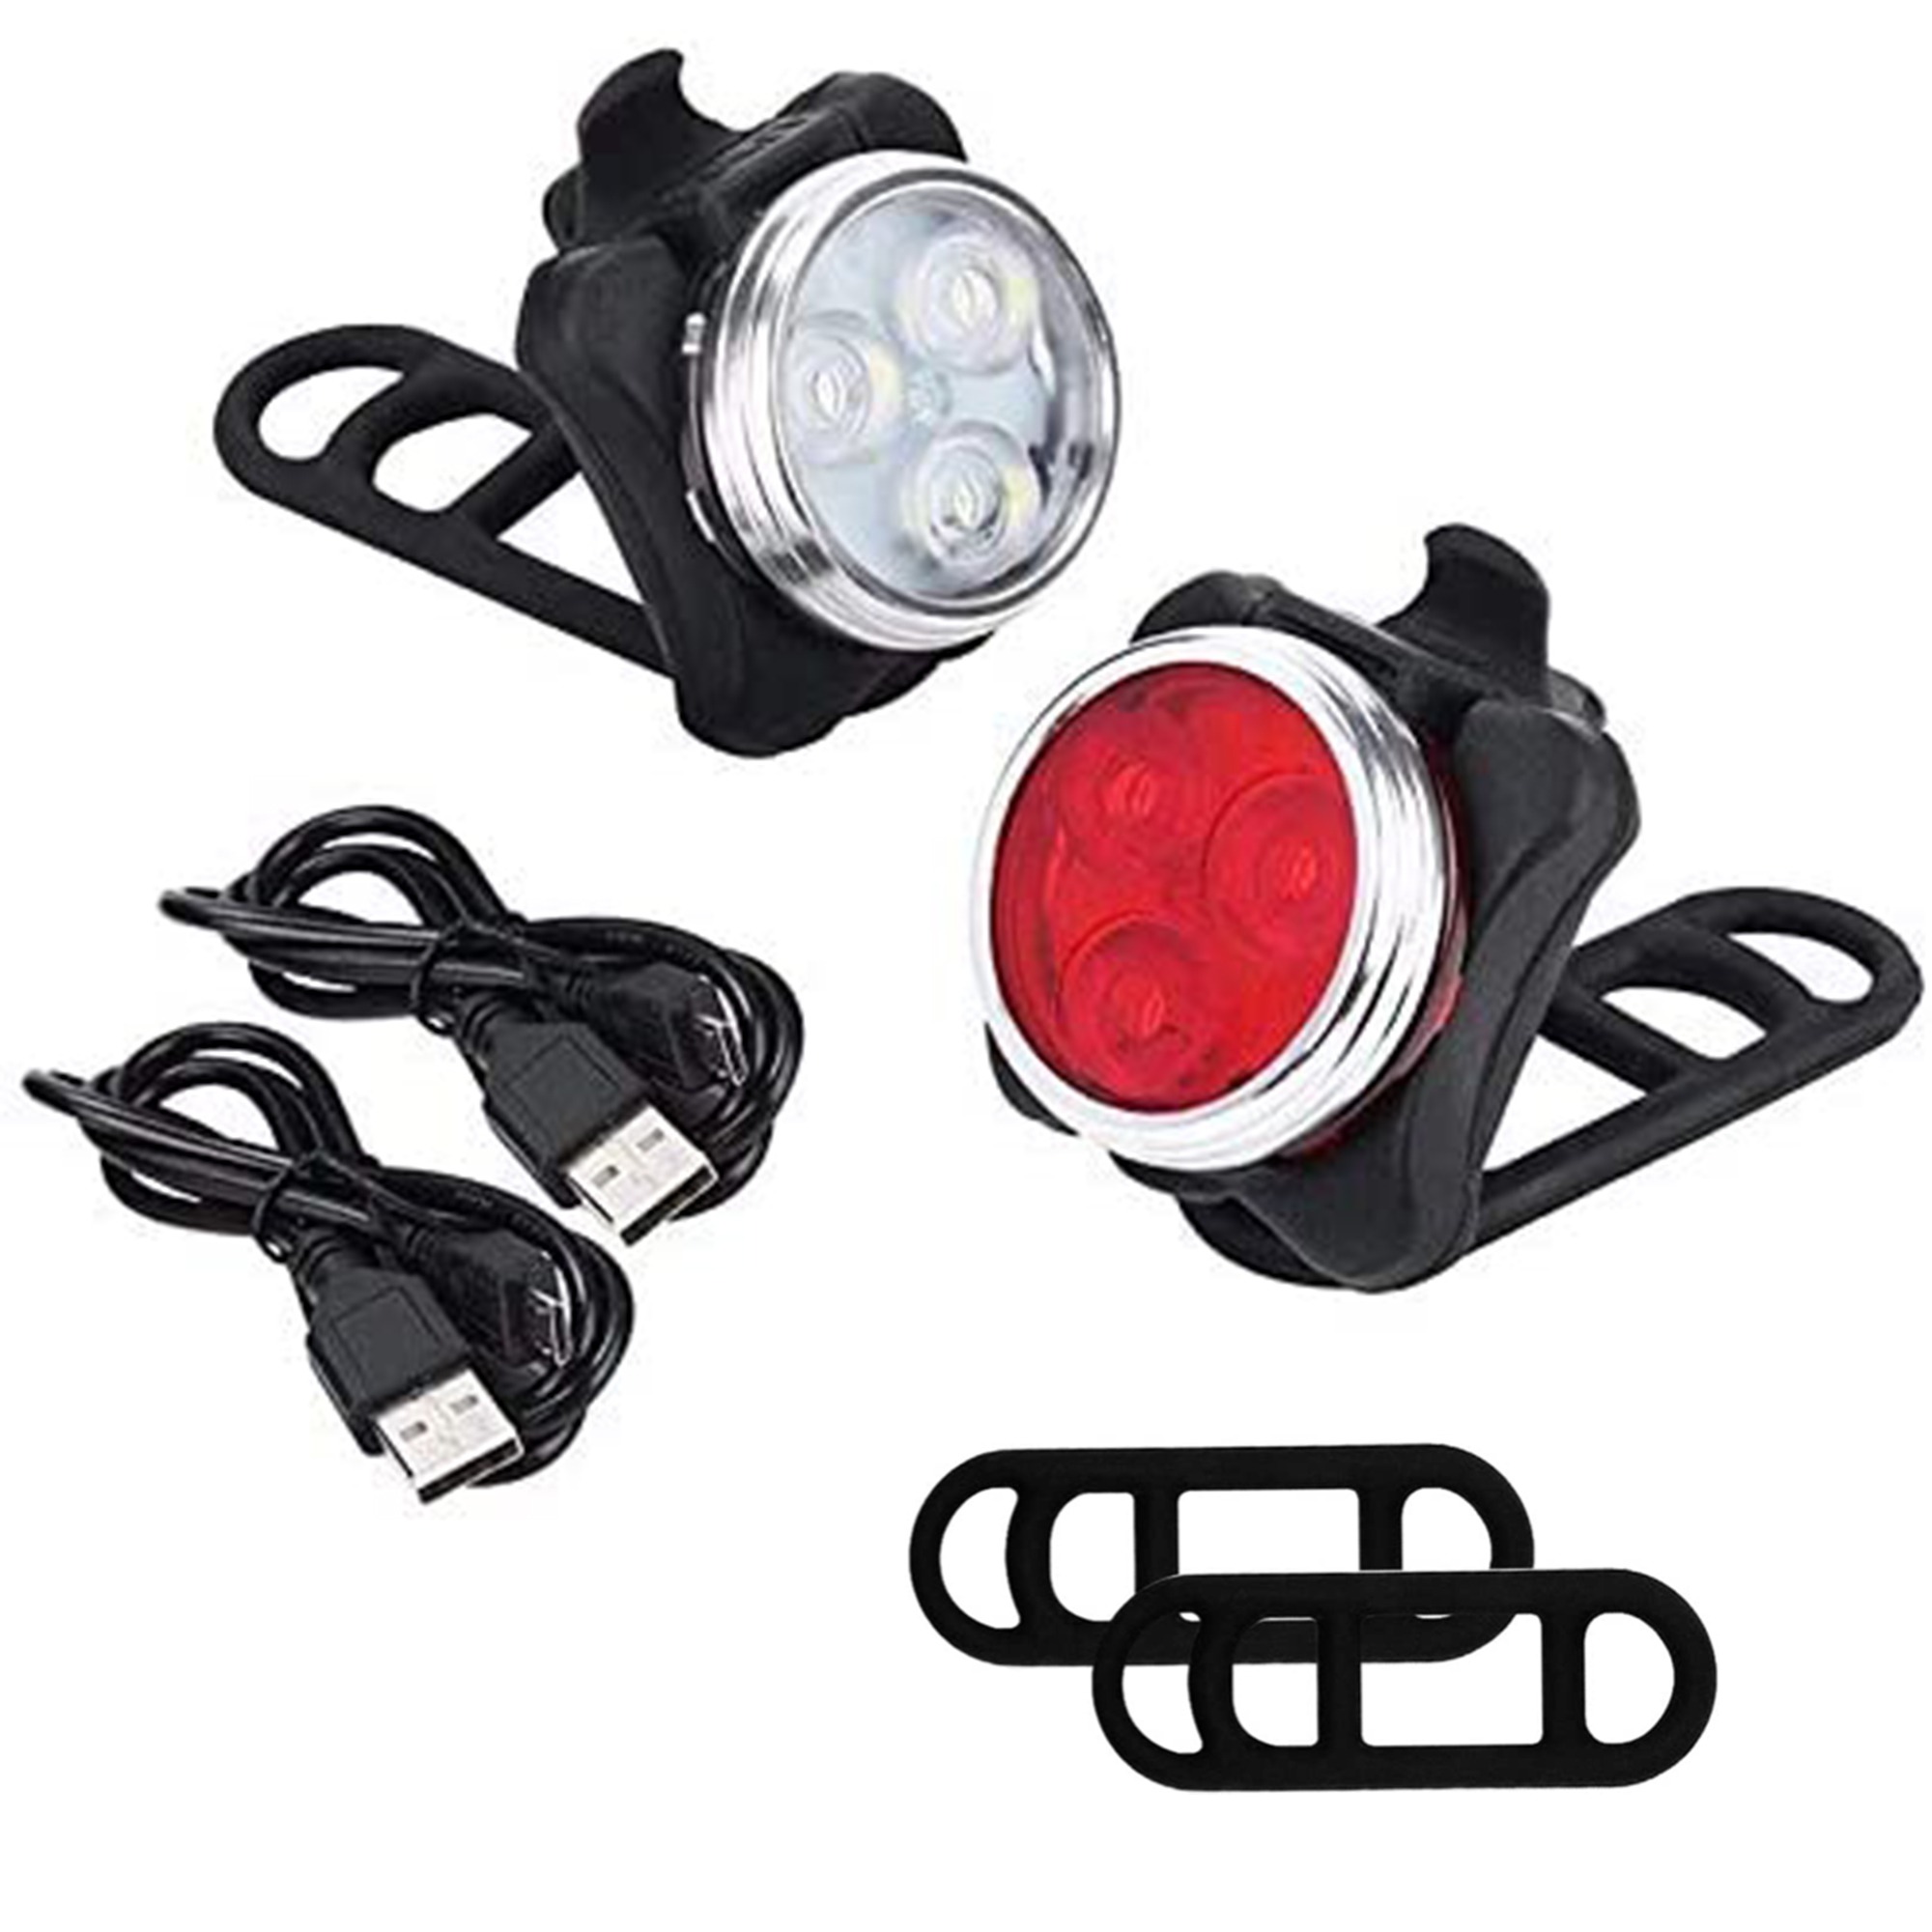 Easy to Install Smart Bike Tail Light Konesky Ultra Bright Bike Light Rechargeable Auto On/Off IPX6 Waterproof LED Bicycle Lights,Fits On Any Road Bikes 